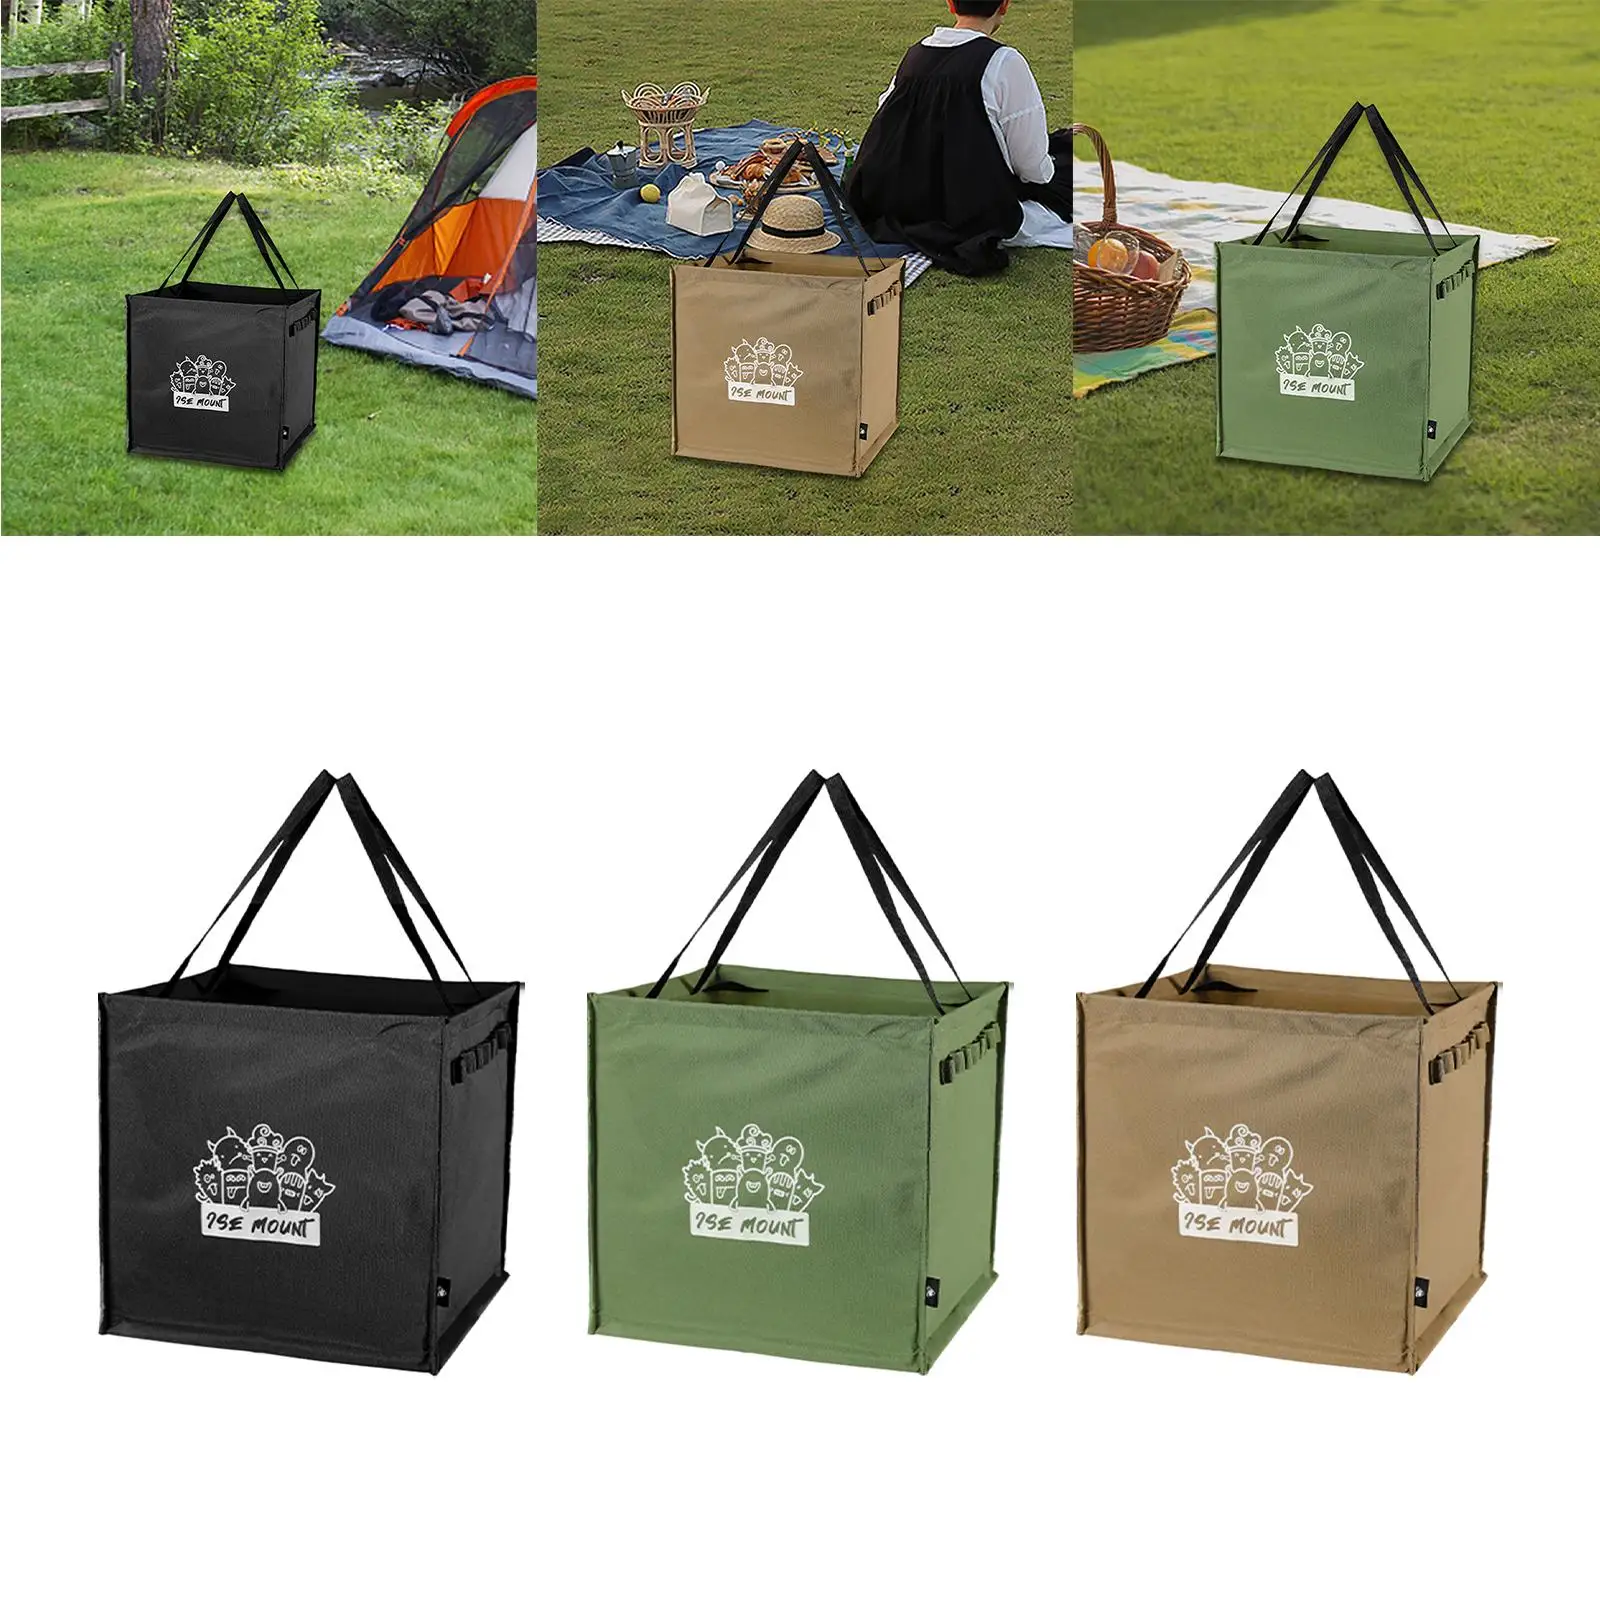 Collapsible Garbage Bag Holder Camping Trash Can Collapsible for Yard Garden